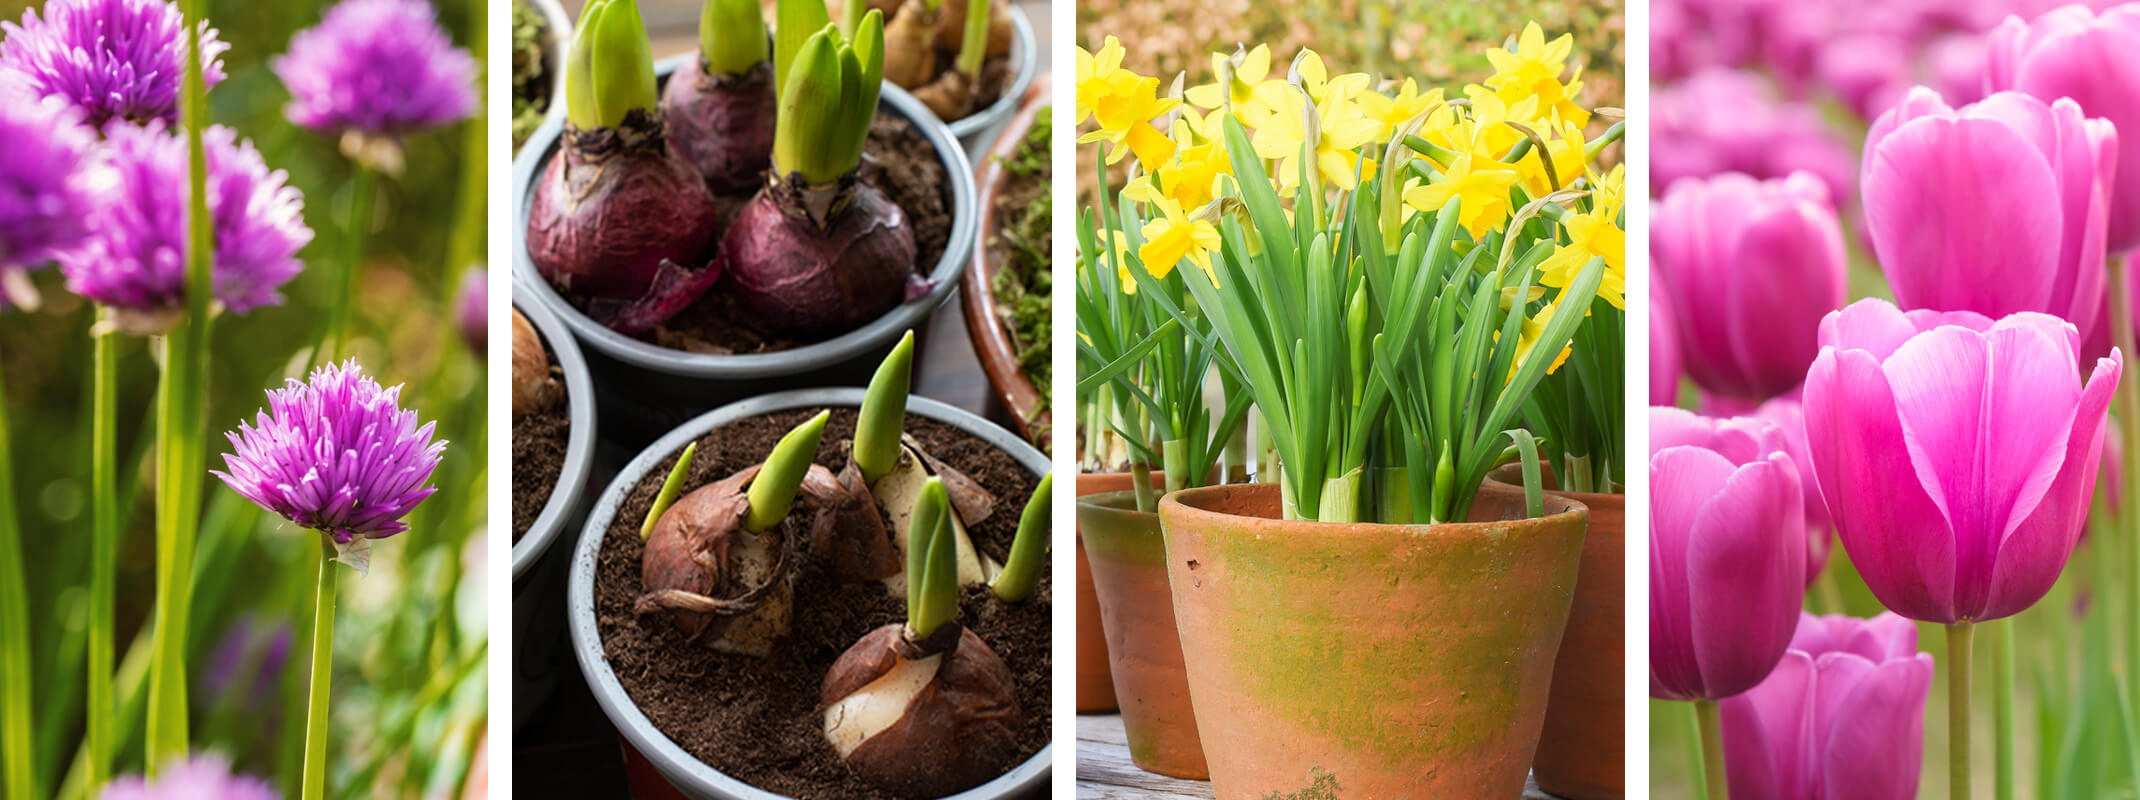 Spring flowering bulbs including allium, pots of tulips bulbs ready to start growing, potted daffodils and pink tulips